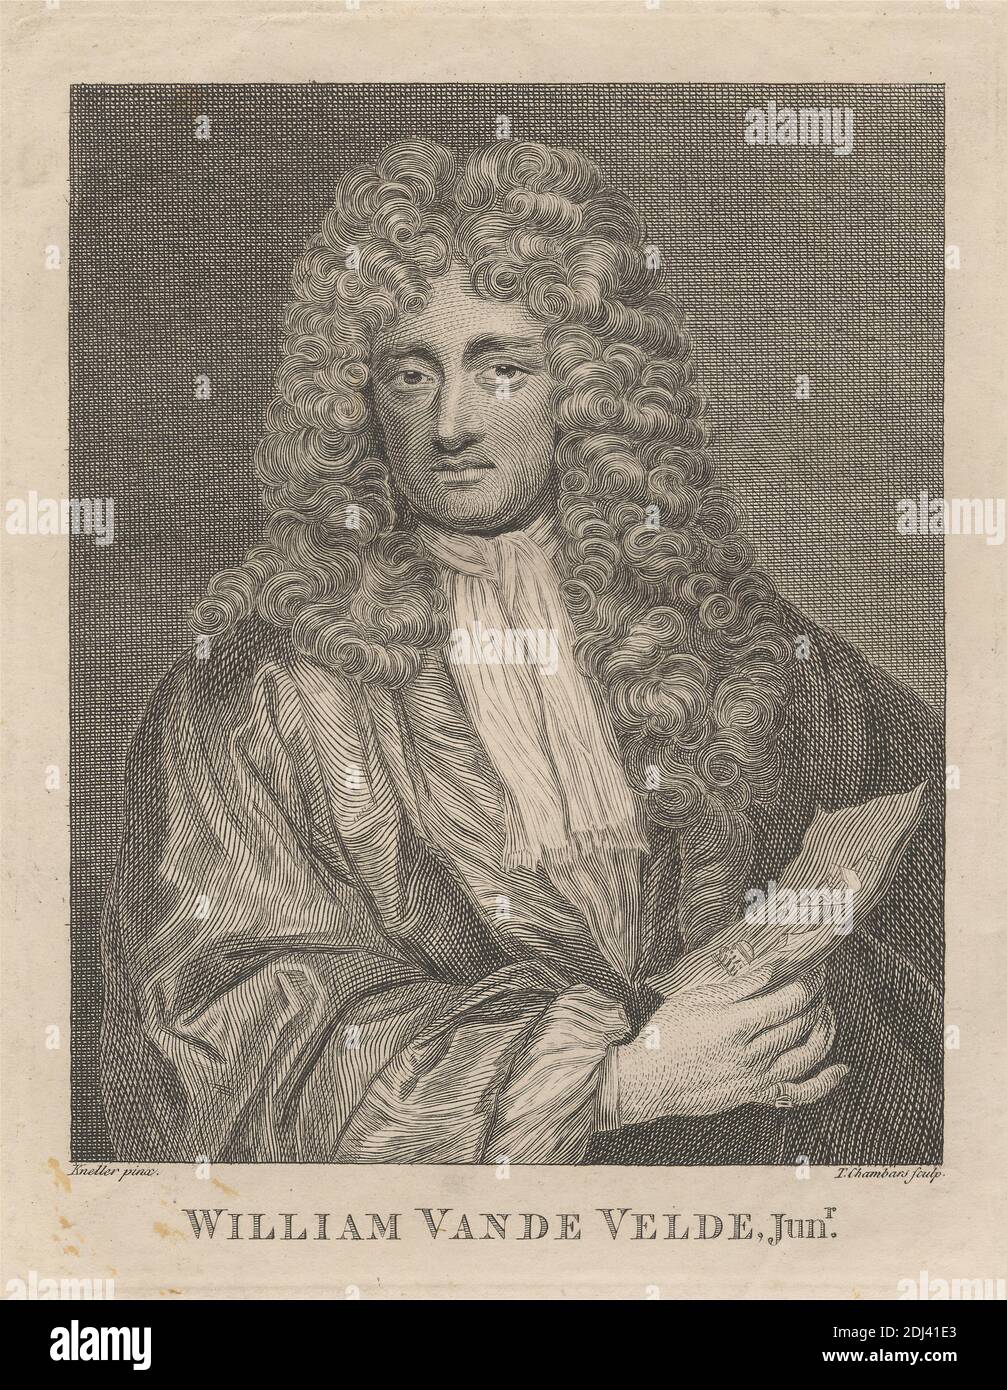 William van der Velde, Junior, Print made by Thomas Chambars, ca. 1724–1789, British, after Sir Godfrey Kneller, 1646–1723, German, active in Britain (from 1676), undated, Etching on moderately thick, smooth, beige wove paper, Sheet: 11 15/16 x 9 inches (30.3 x 22.9 cm), Plate: 6 15/16 x 5 5/16 inches (17.6 x 13.5 cm), and Image: 5 7/8 x 4 3/4 inches (14.9 x 12 cm), academic robes, artist, cloak, gesturing, letter, man, painter, portrait, posing, ring, scarf, ship, solemn, wig Stock Photo